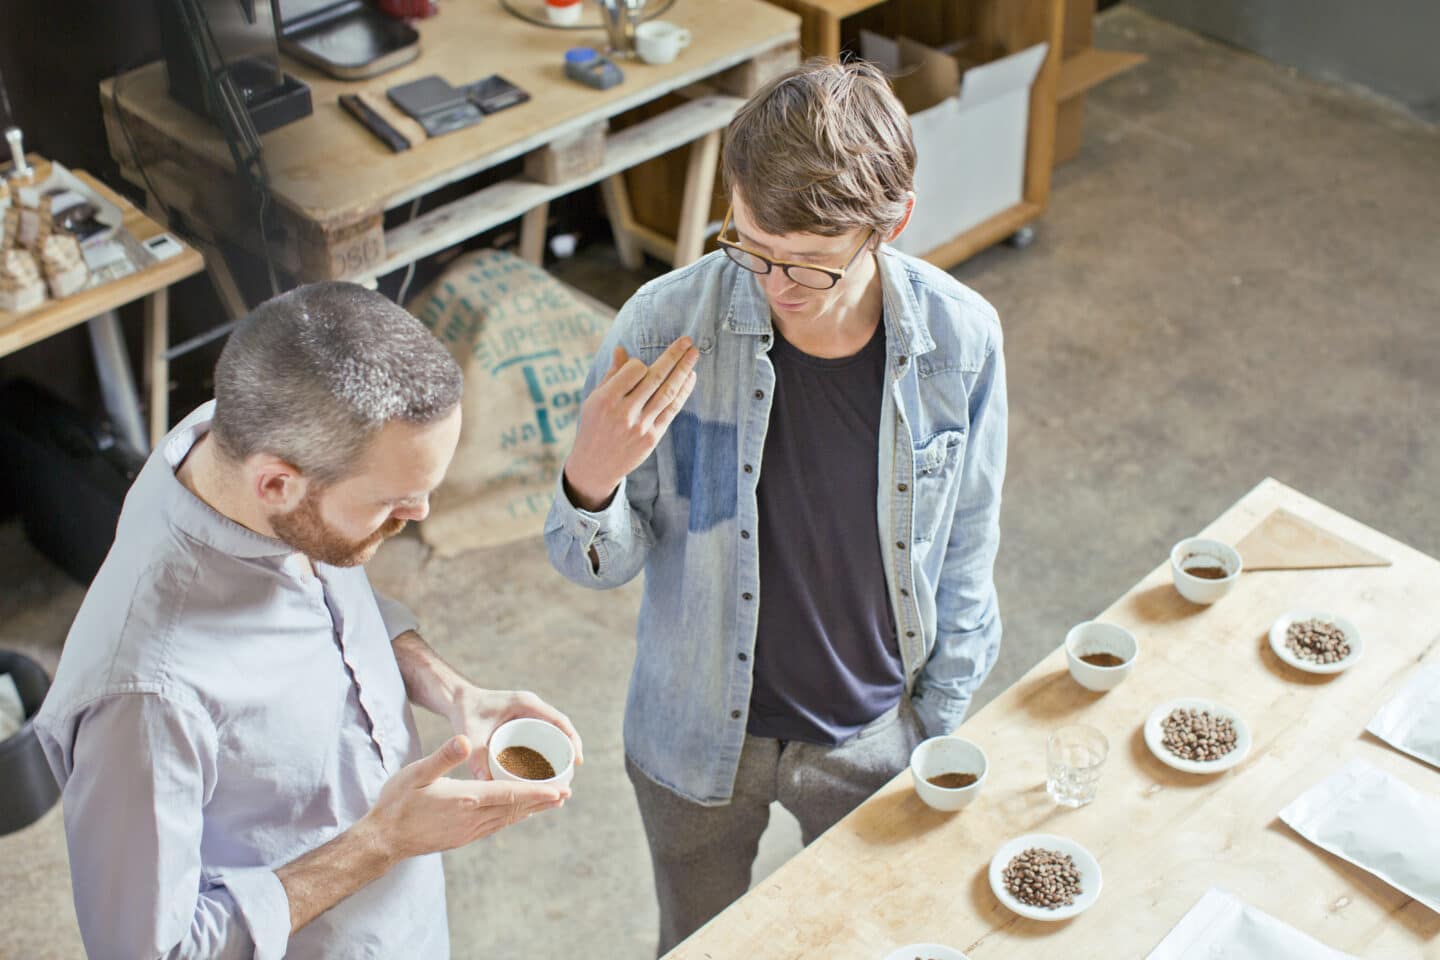 Two people getting ready to cup coffee